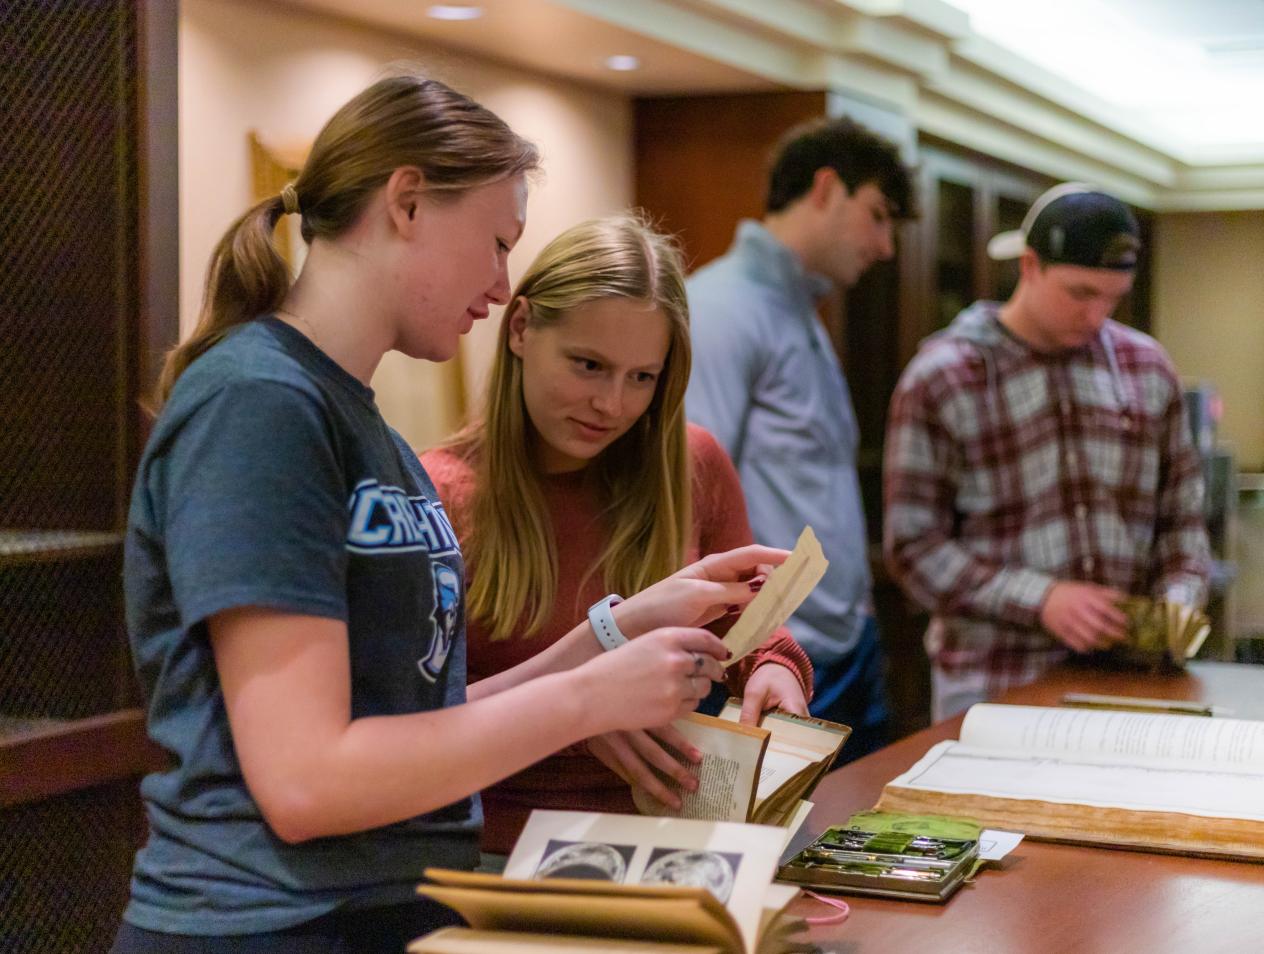 Students Looking at rare books